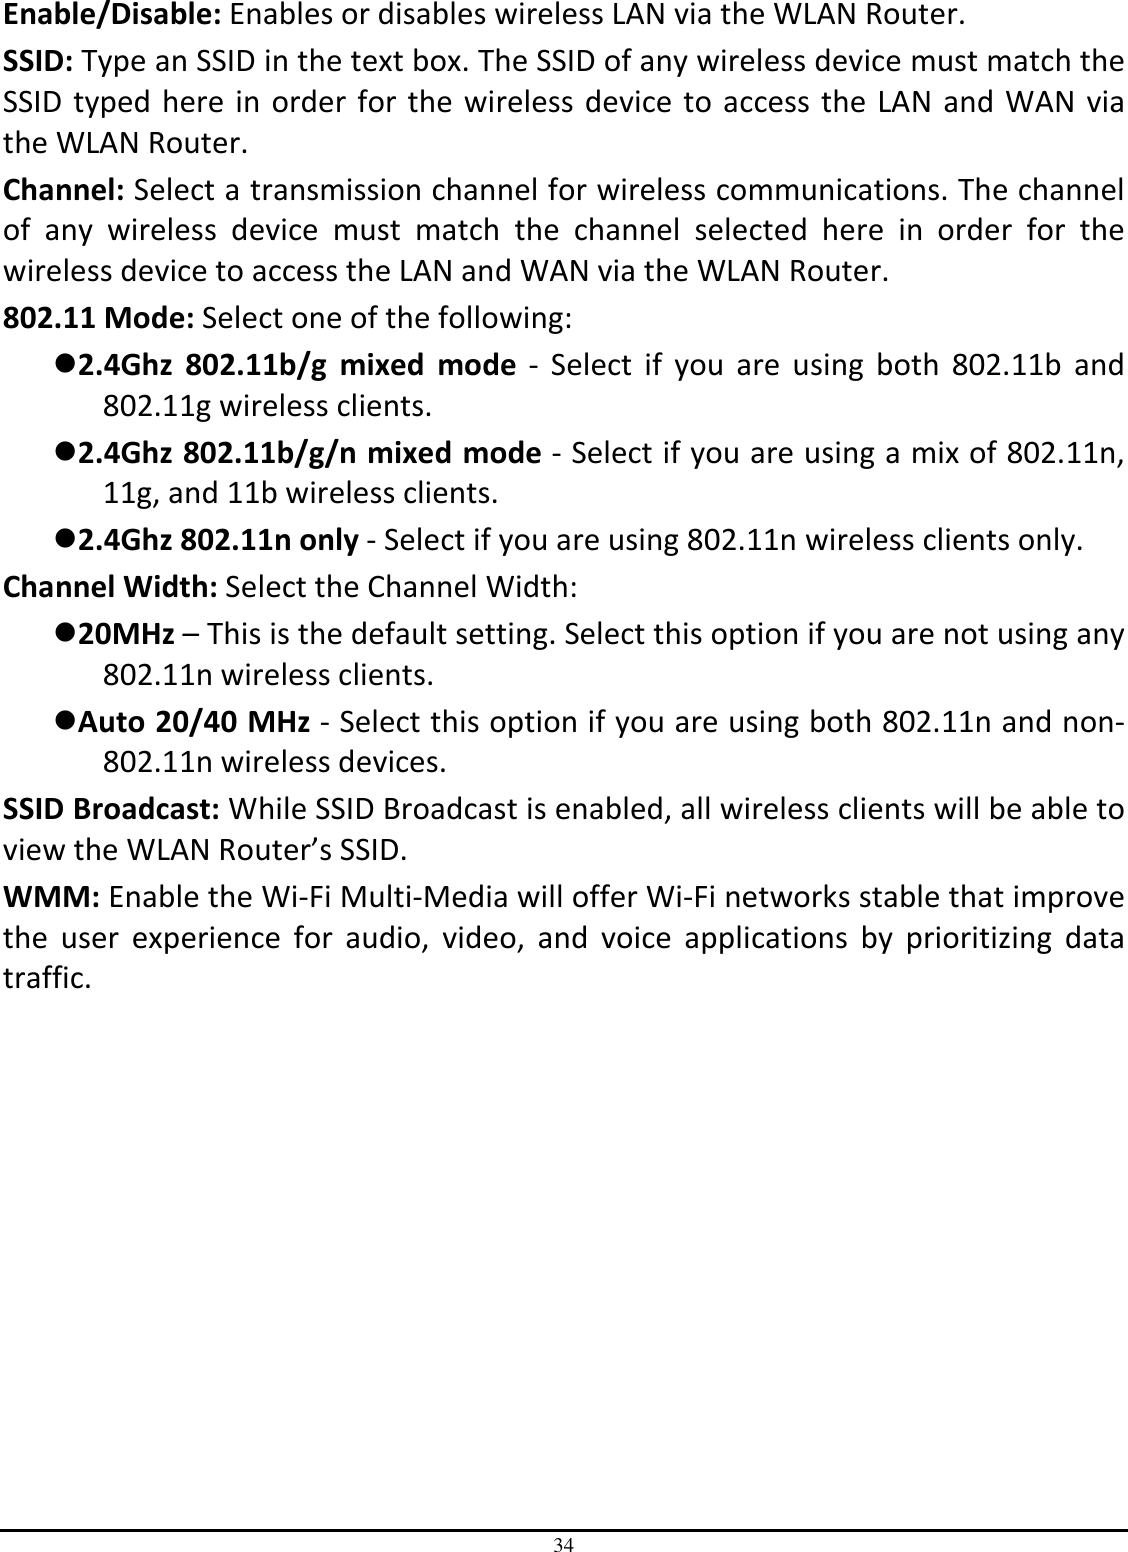 34 Enable/Disable: Enables or disables wireless LAN via the WLAN Router. SSID: Type an SSID in the text box. The SSID of any wireless device must match the SSID typed here  in order  for the wireless  device to  access the  LAN and WAN  via the WLAN Router. Channel: Select a transmission channel for wireless communications. The channel of  any  wireless  device  must  match  the  channel  selected  here  in  order  for  the wireless device to access the LAN and WAN via the WLAN Router. 802.11 Mode: Select one of the following: 2.4Ghz  802.11b/g  mixed  mode  -  Select  if  you  are  using  both  802.11b  and 802.11g wireless clients. 2.4Ghz 802.11b/g/n mixed mode - Select if you are using a mix of 802.11n, 11g, and 11b wireless clients. 2.4Ghz 802.11n only - Select if you are using 802.11n wireless clients only. Channel Width: Select the Channel Width: 20MHz – This is the default setting. Select this option if you are not using any 802.11n wireless clients. Auto 20/40 MHz - Select this option if you are using both 802.11n and non-802.11n wireless devices. SSID Broadcast: While SSID Broadcast is enabled, all wireless clients will be able to view the WLAN Router’s SSID.  WMM: Enable the Wi-Fi Multi-Media will offer Wi-Fi networks stable that improve the  user  experience  for  audio,  video,  and  voice  applications  by  prioritizing  data traffic.  